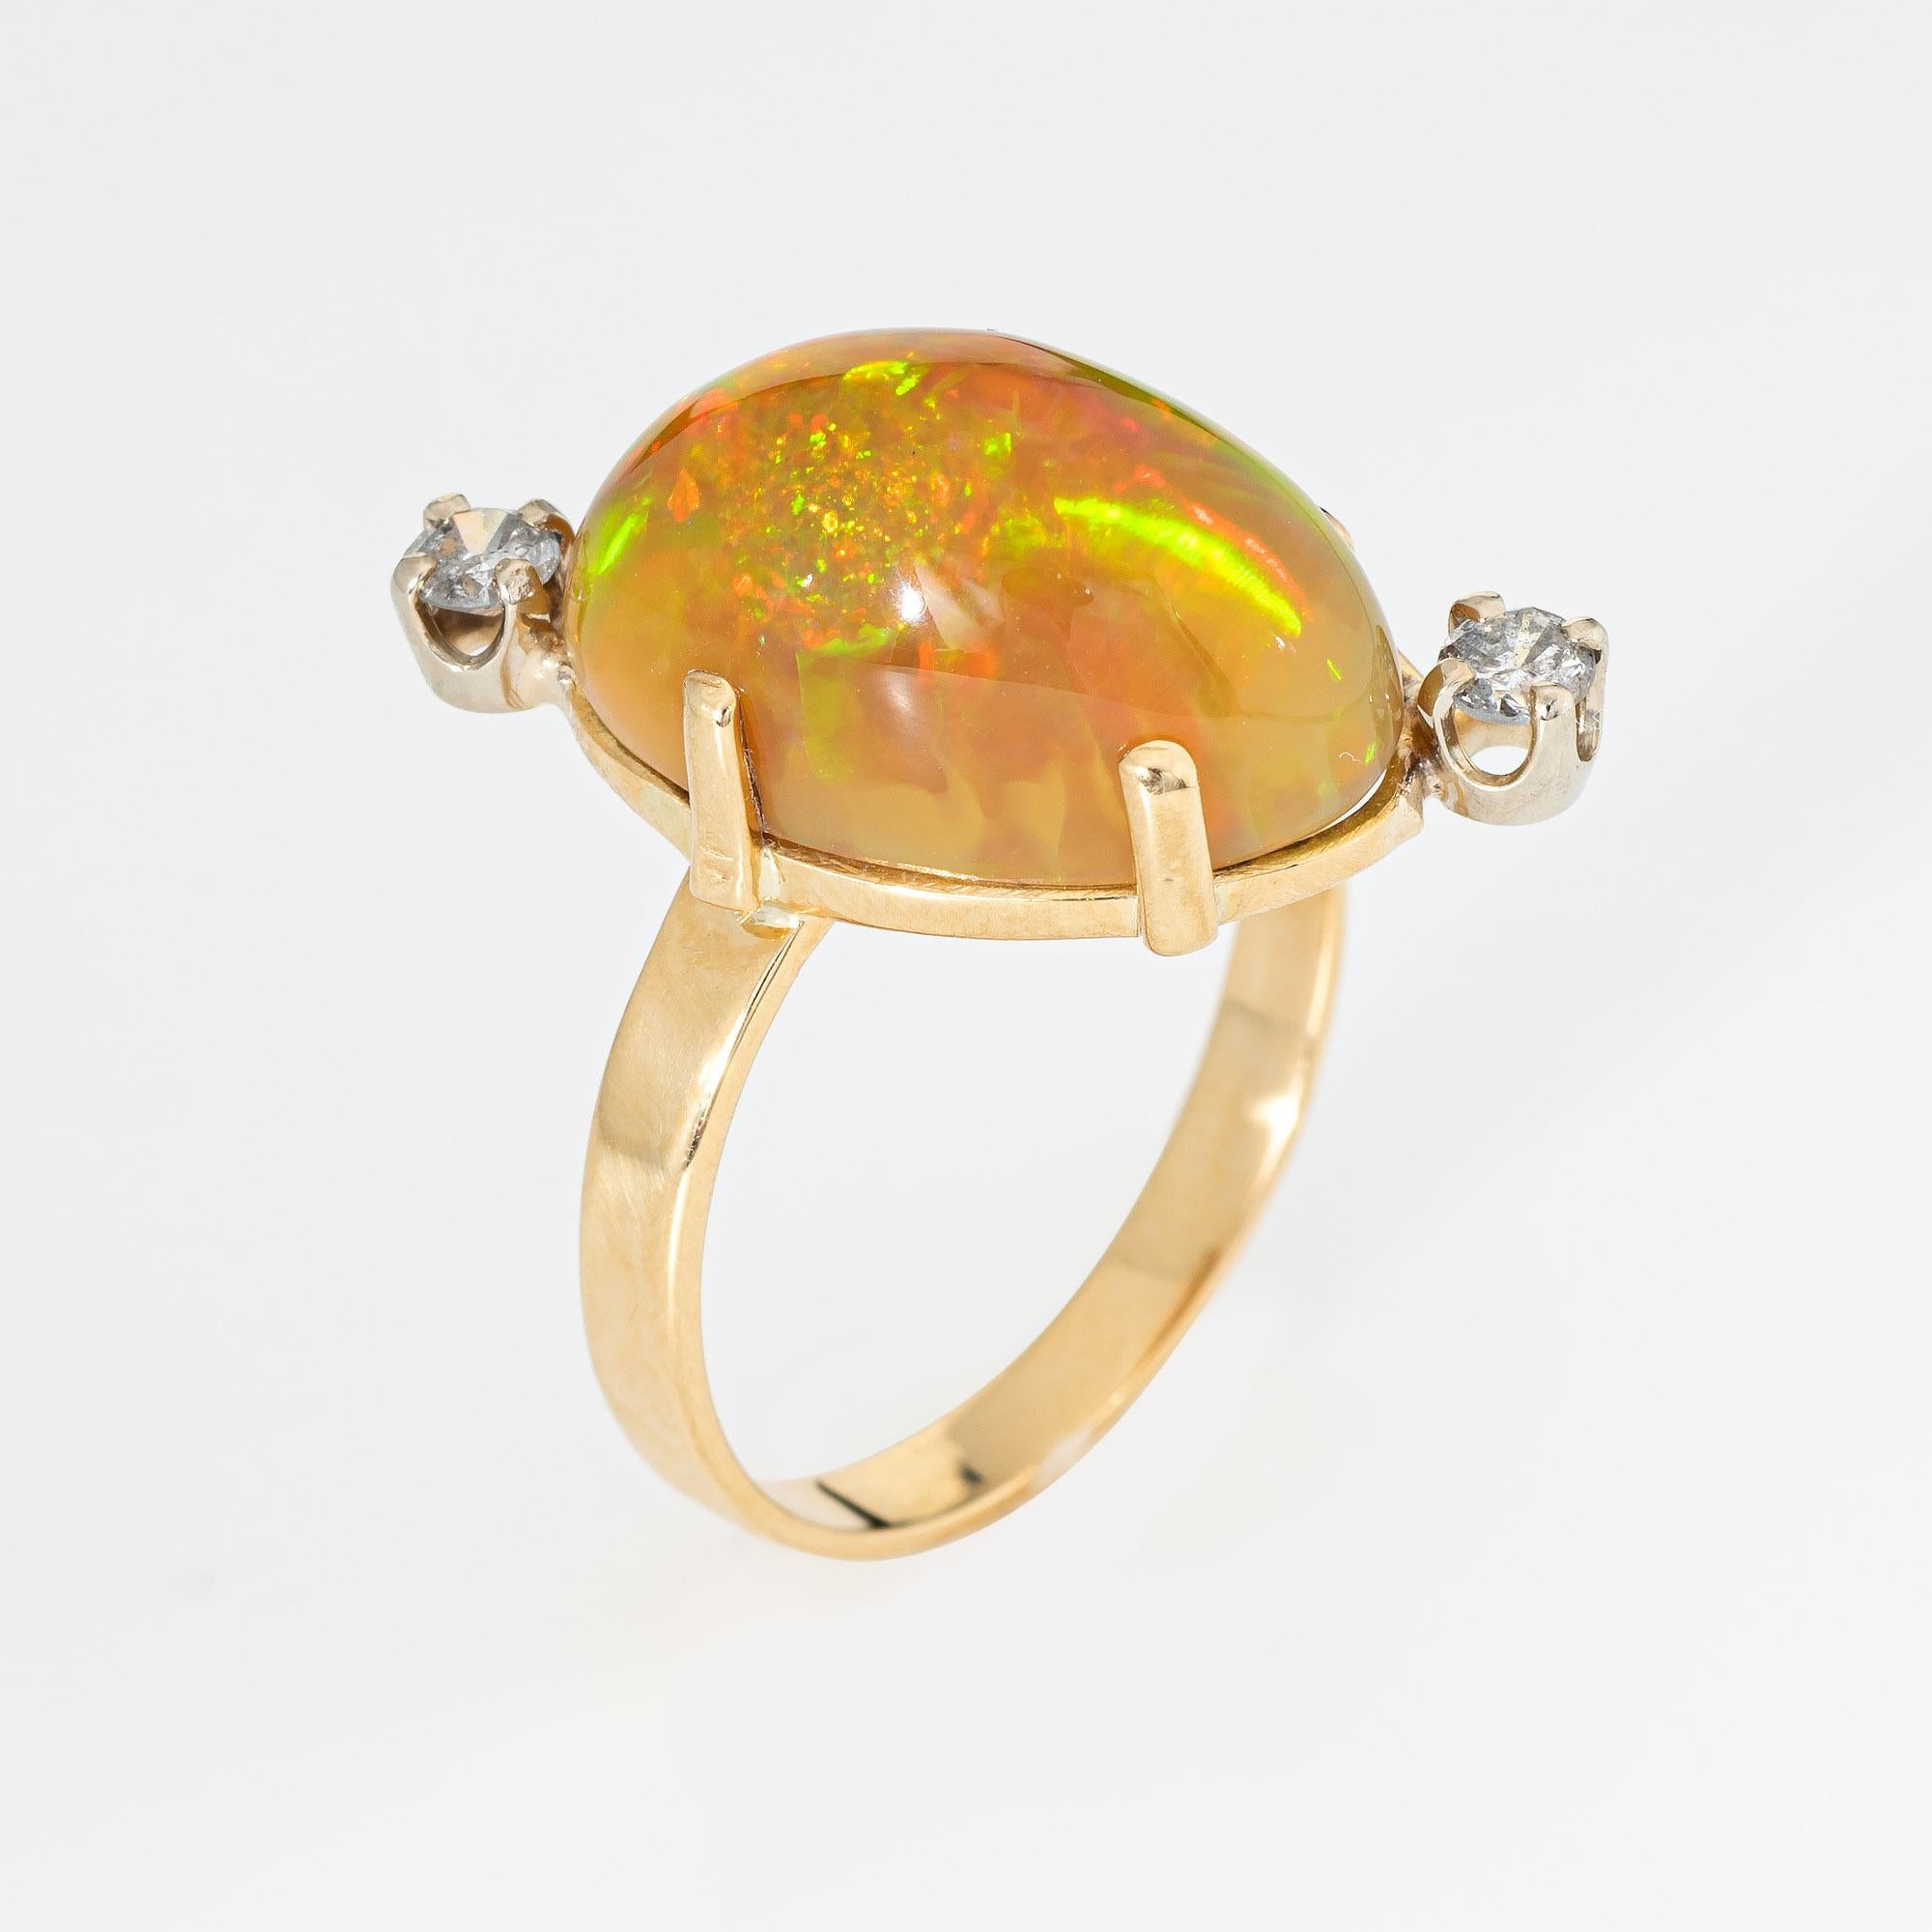 Stylish vintage Ethiopian opal & diamond cocktail ring crafted in 18 karat yellow gold (circa 1960s to 1970s).

Natural opal is at estimated at 10 carats, accented with two estimated 0.08 carat diamonds. The total diamond weight is estimated at 0.16